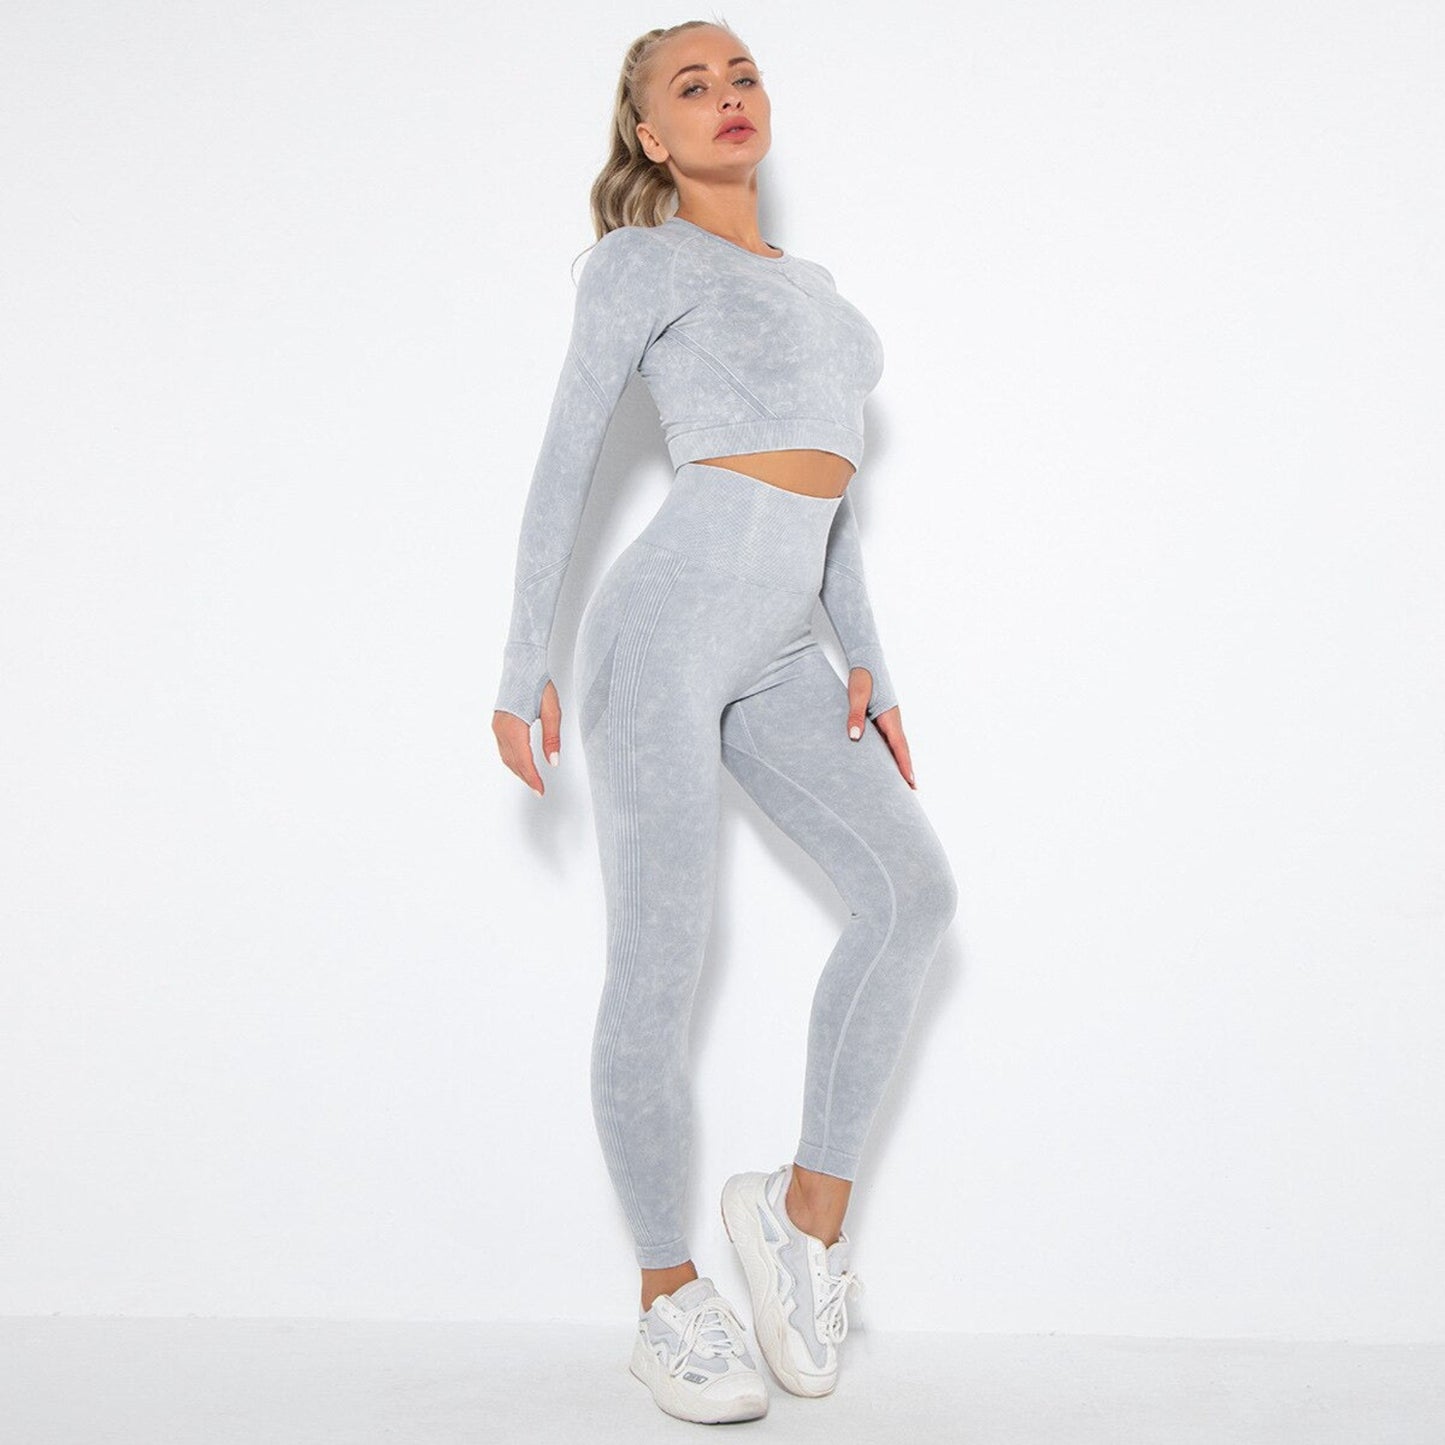 Model wearing gray contouring matching suit from Vibras Activewear.